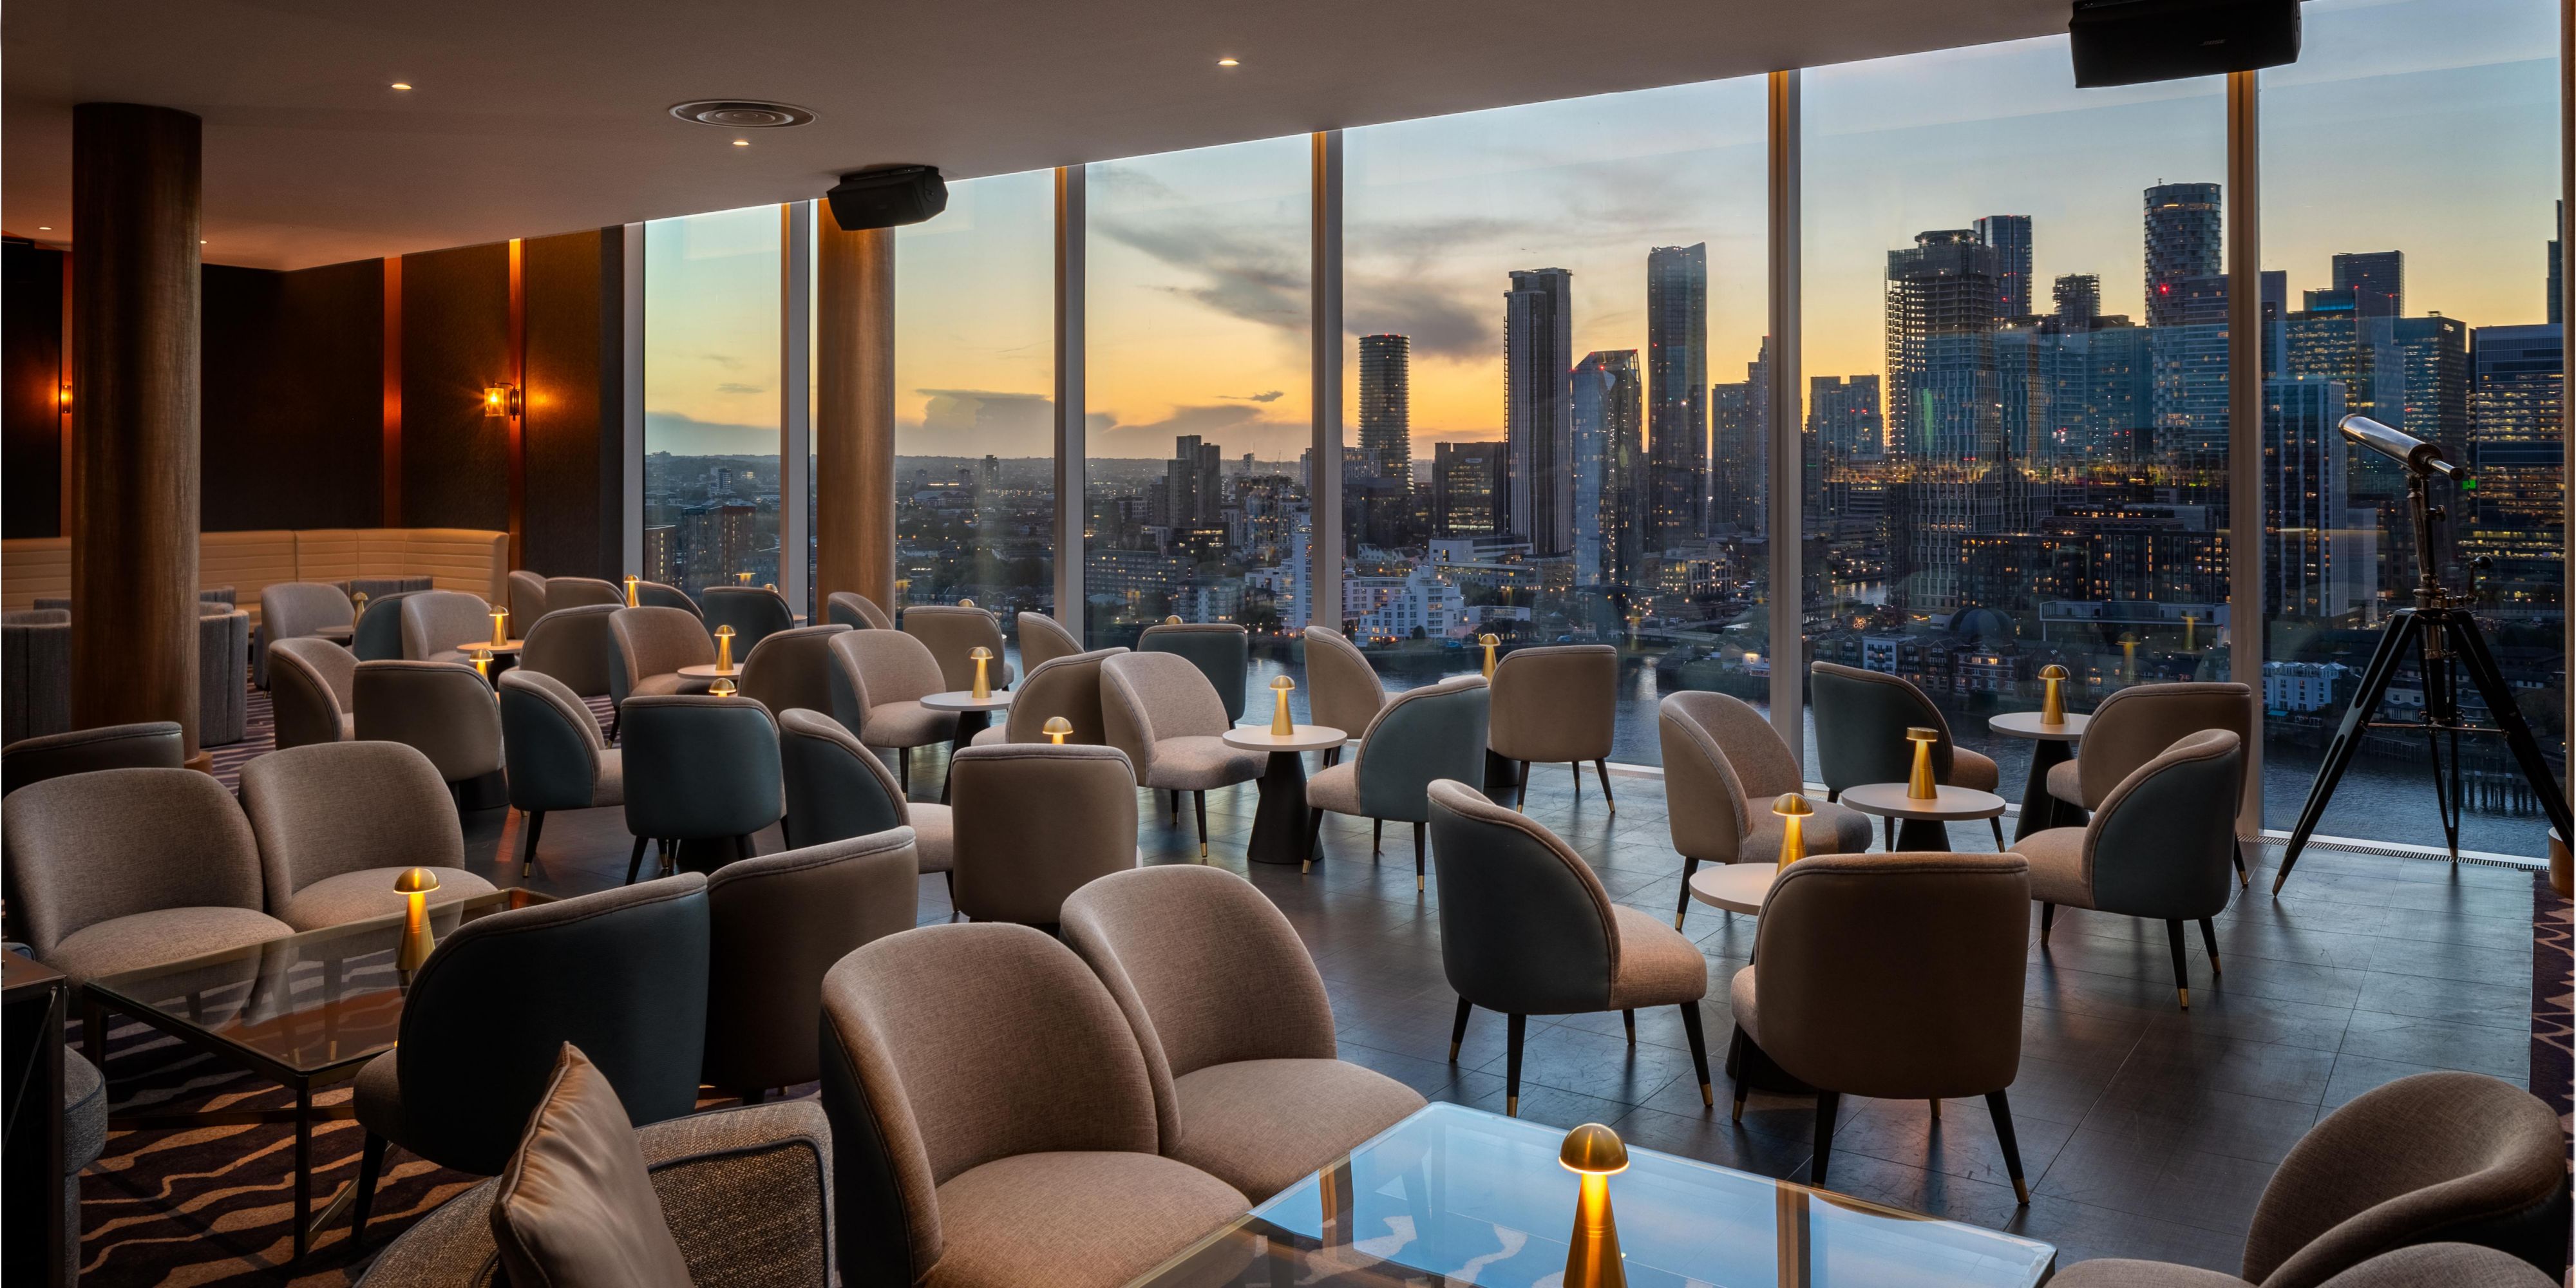 Discover a stylish and mouth-watering selection of gastronomic destinations to explore; from Indian fine dining, afternoon tea, and spa packages, to vivacious cocktails sipped on the eighteenth's floor with 180-degree views across the River Thames.